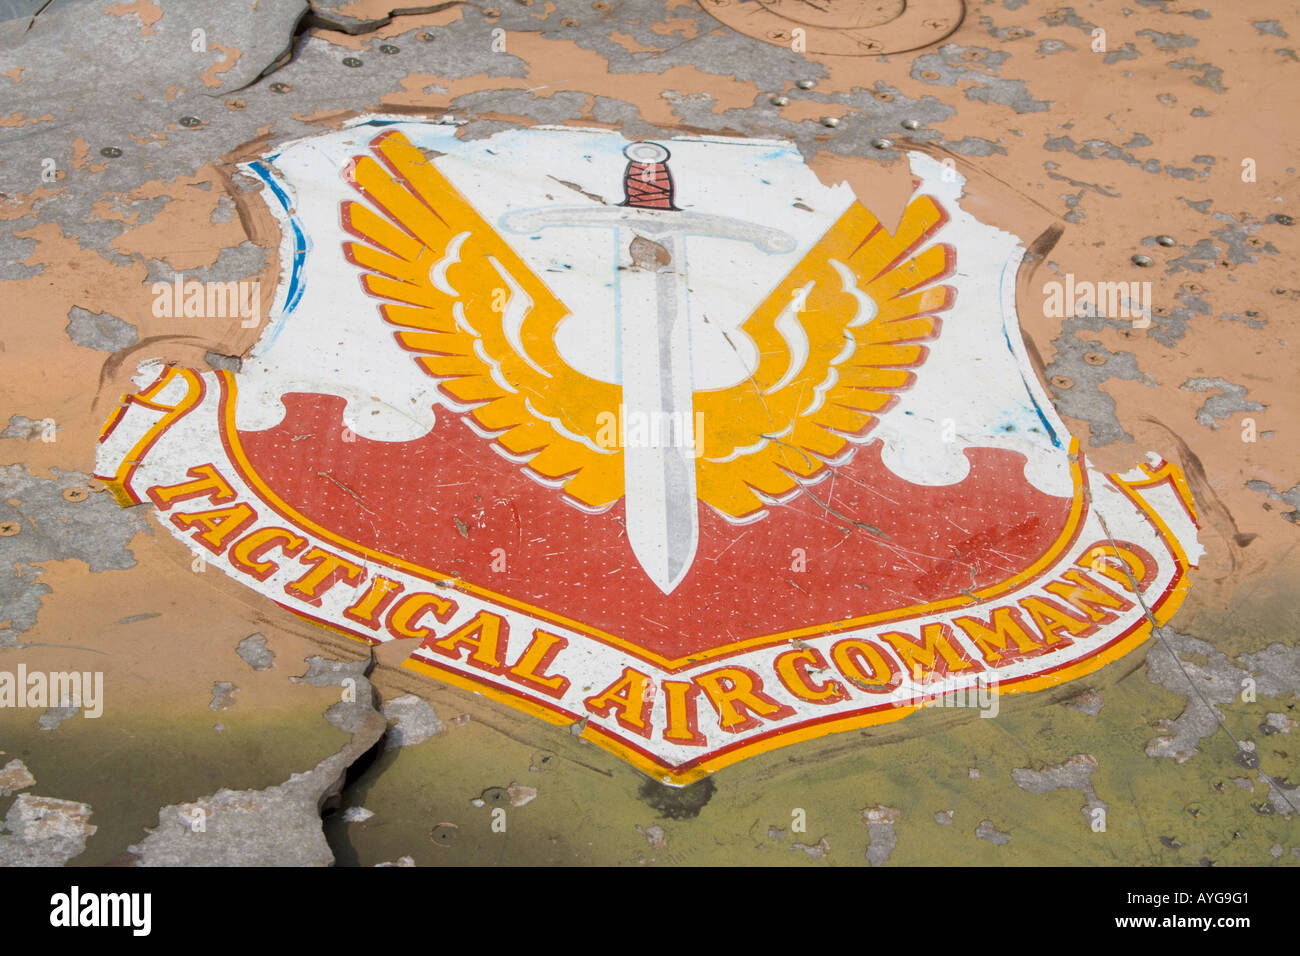 USAF Tactical Air Command, TAC Insignia, Wing from Wreckage of a Plane downed during American War Army Museum Hanoi Vietnam Stock Photo